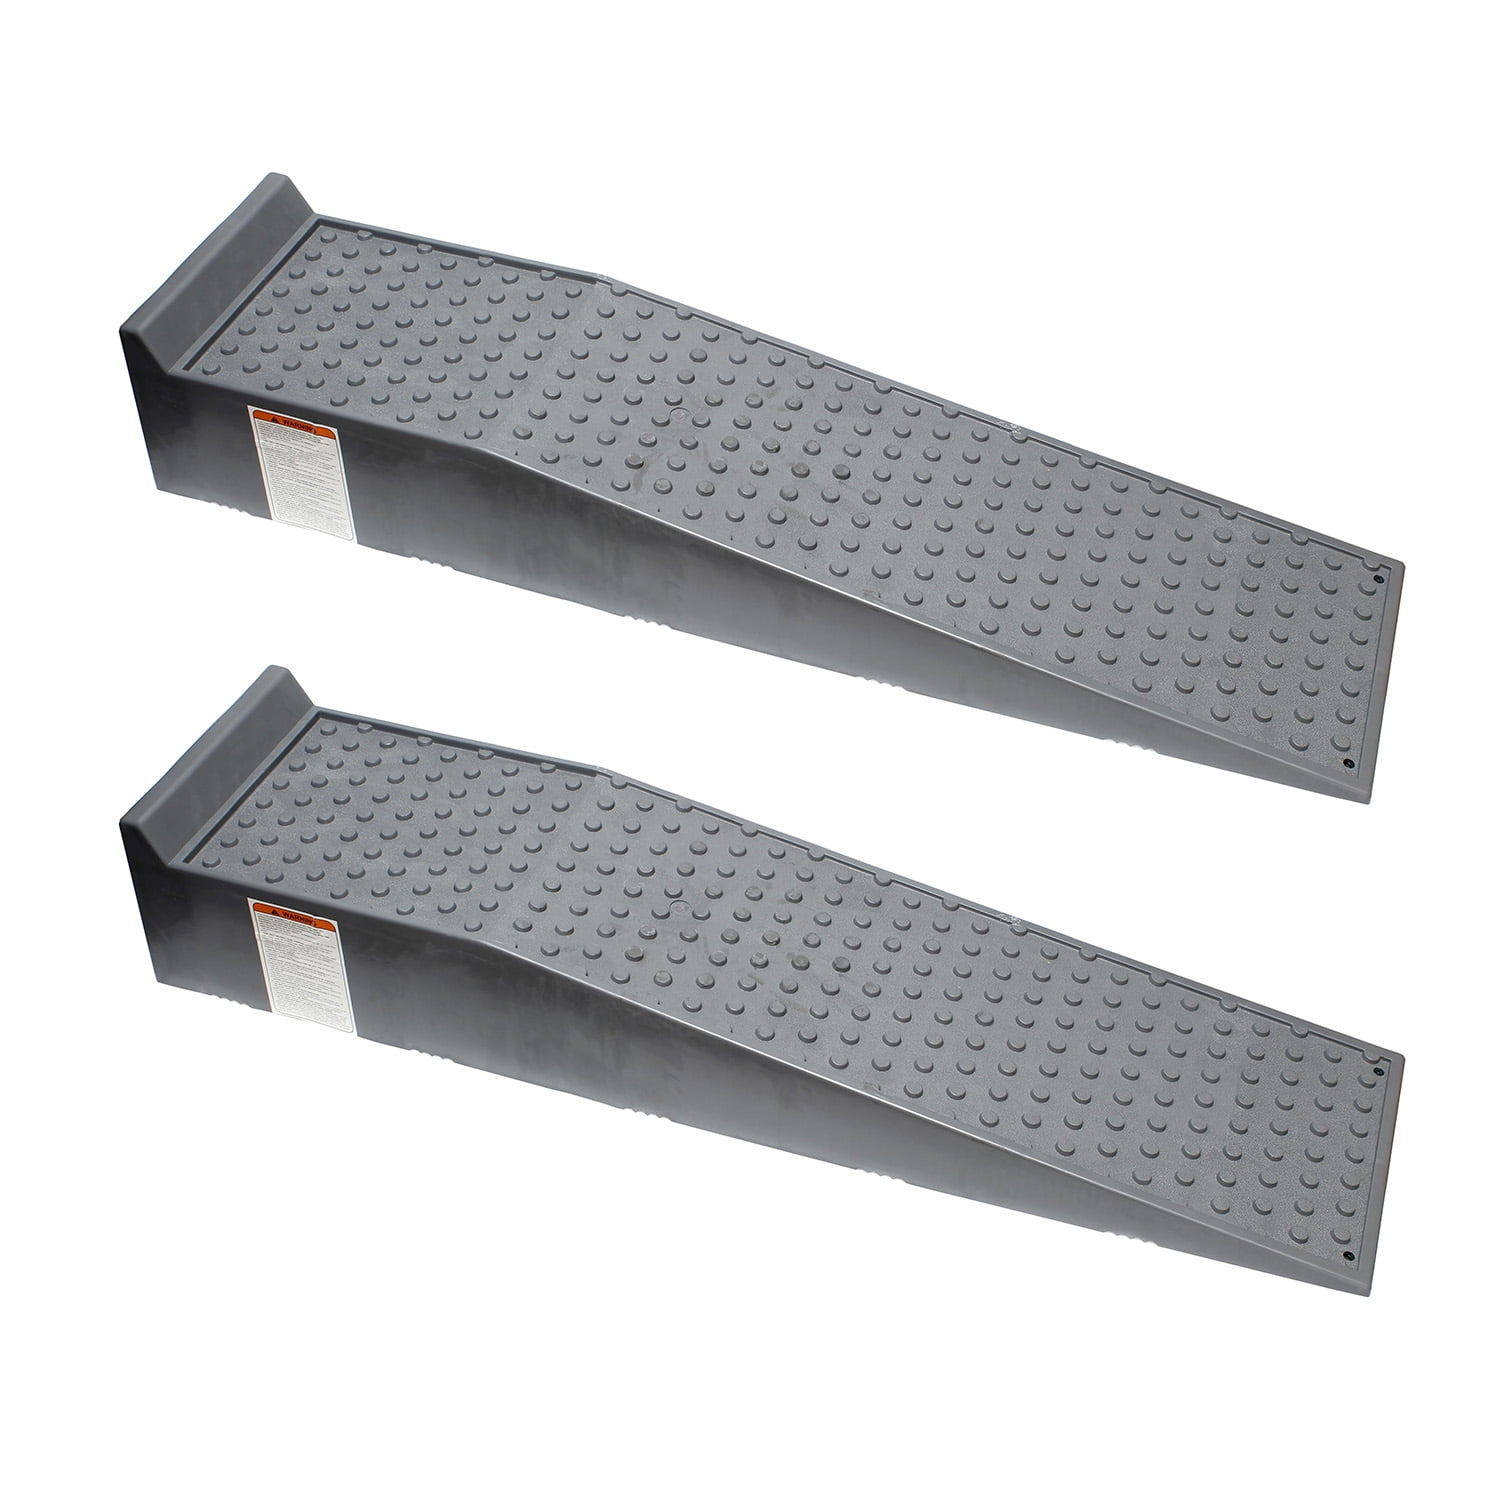 Vehicle Ramps Automotive Portable Rugged Structural Outdoor Industrial RhinoGear 